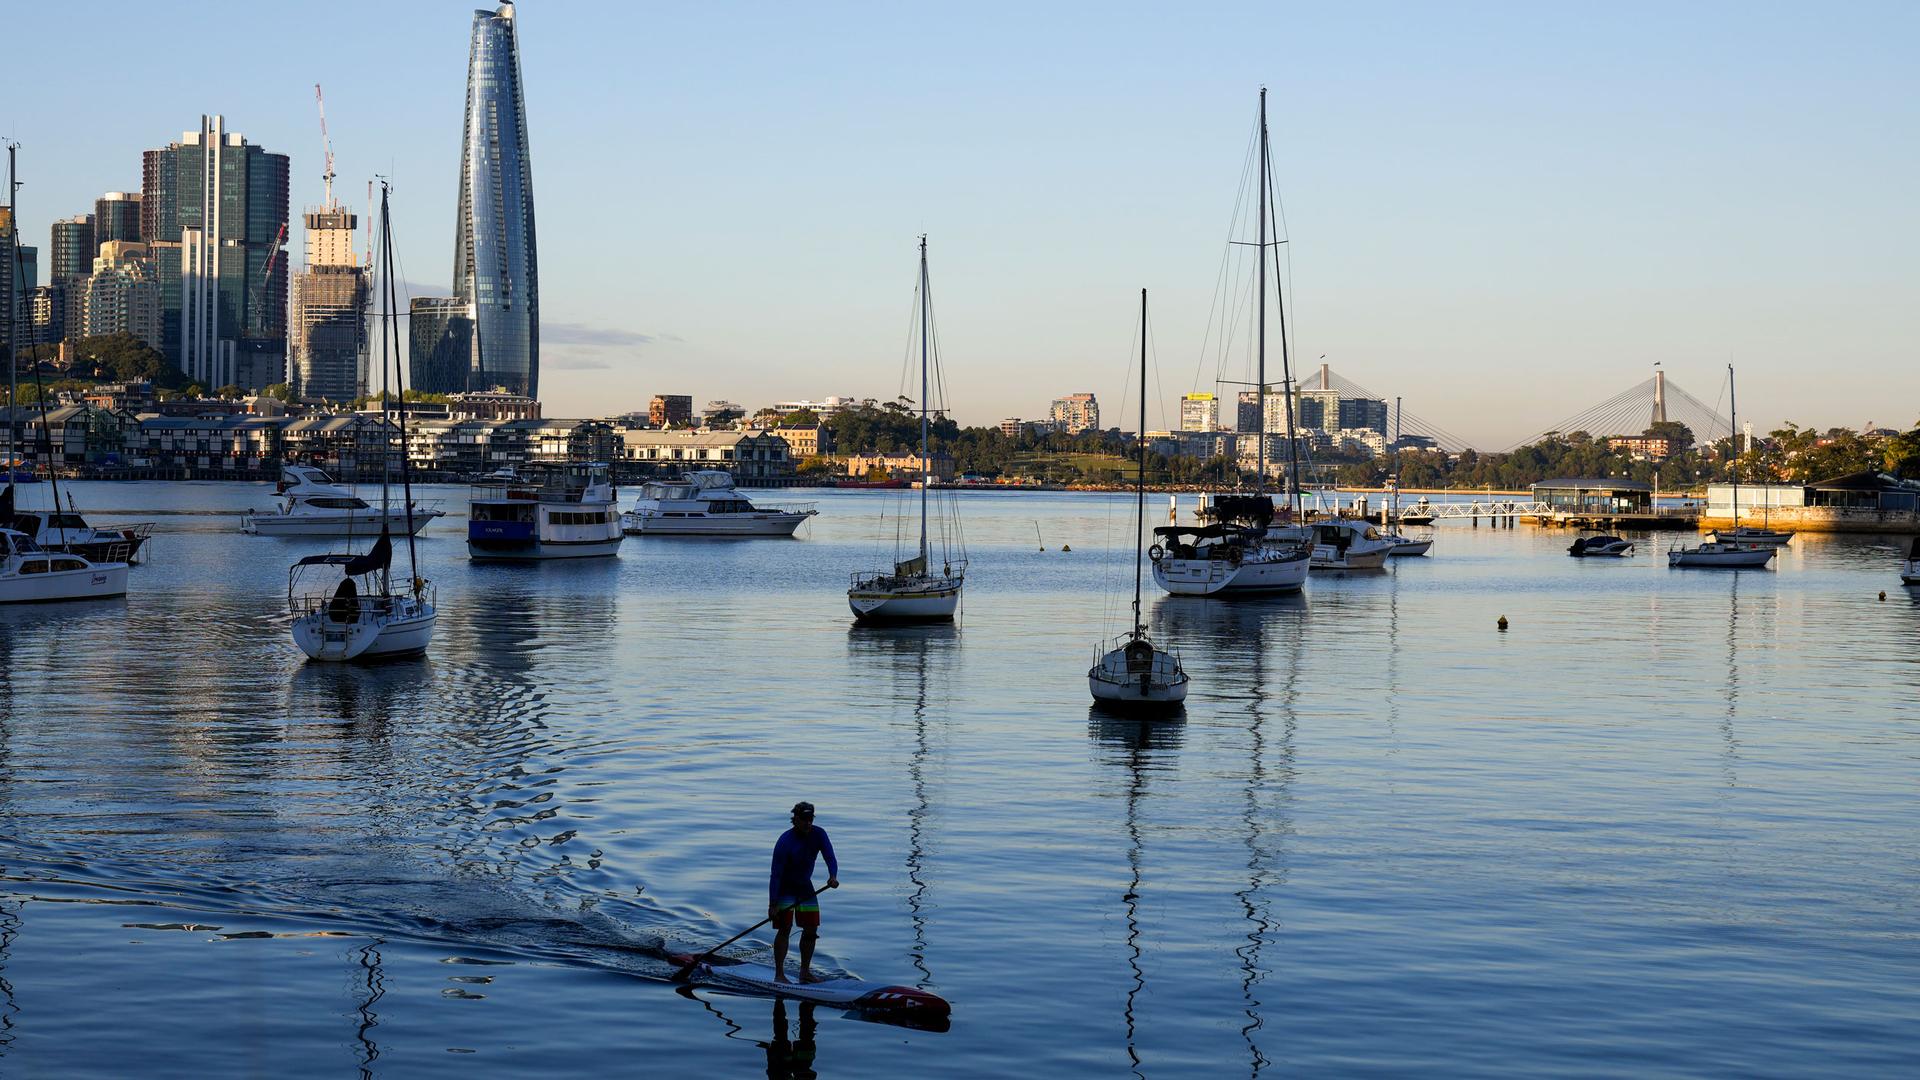 A man is shown on his stand up paddle board with several boats docked in the distance along with Sydney's skyline.